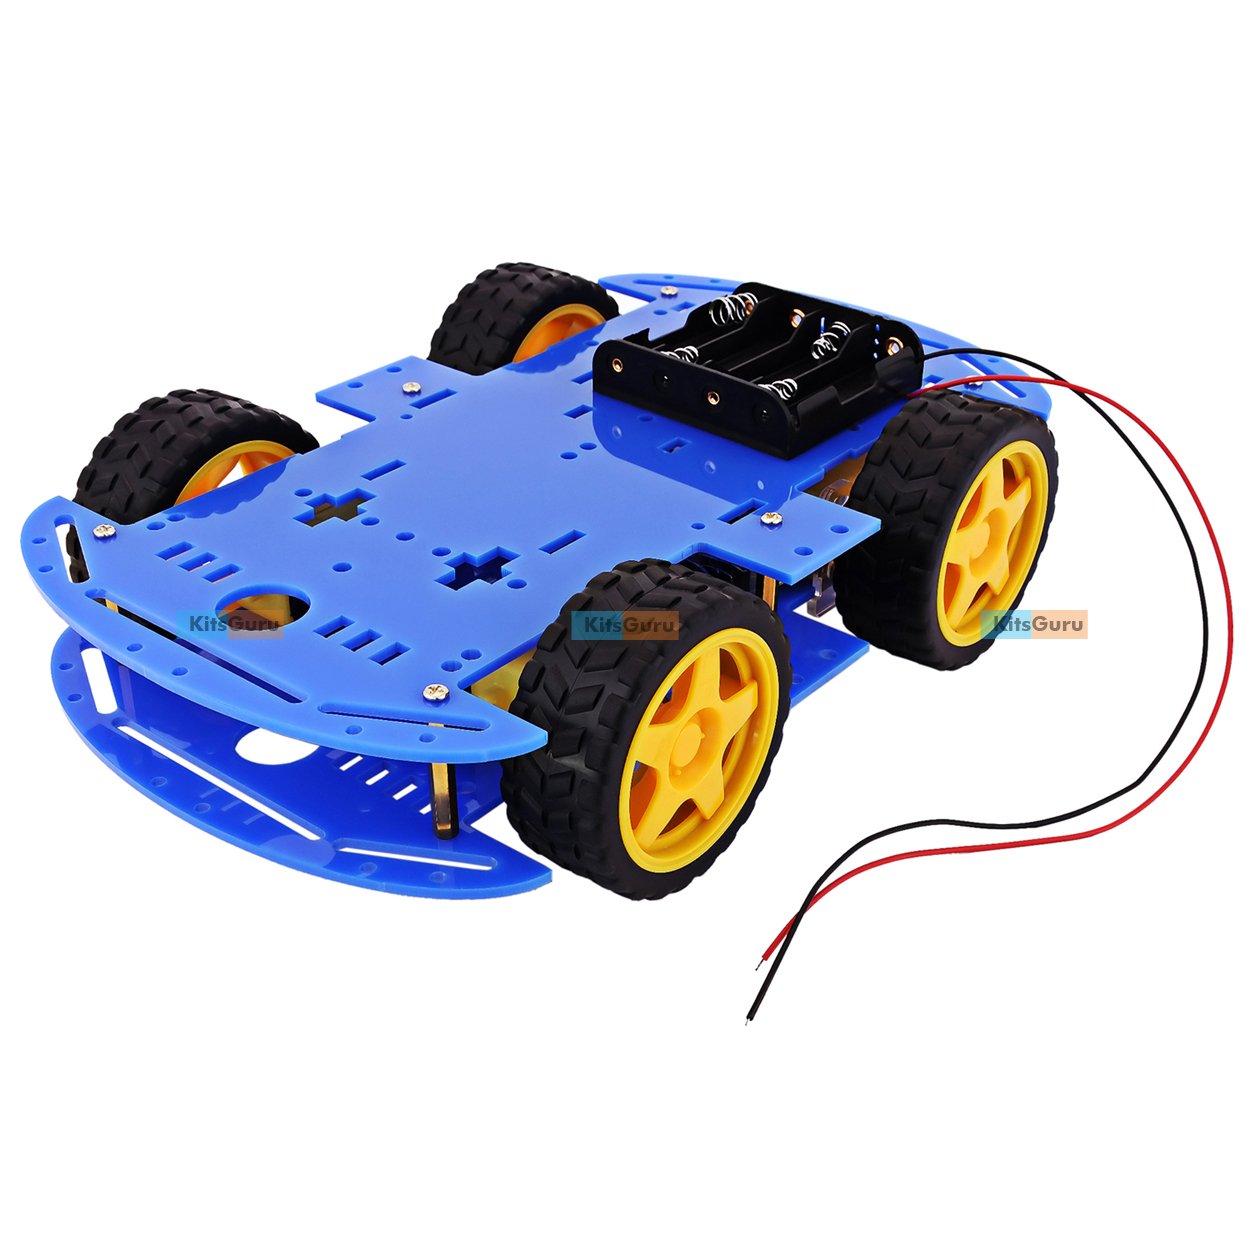 Longer version of 4 WD Double Layer Smart Car Chassis Kit : Blue Color -Buy  Online India - KitsGuru